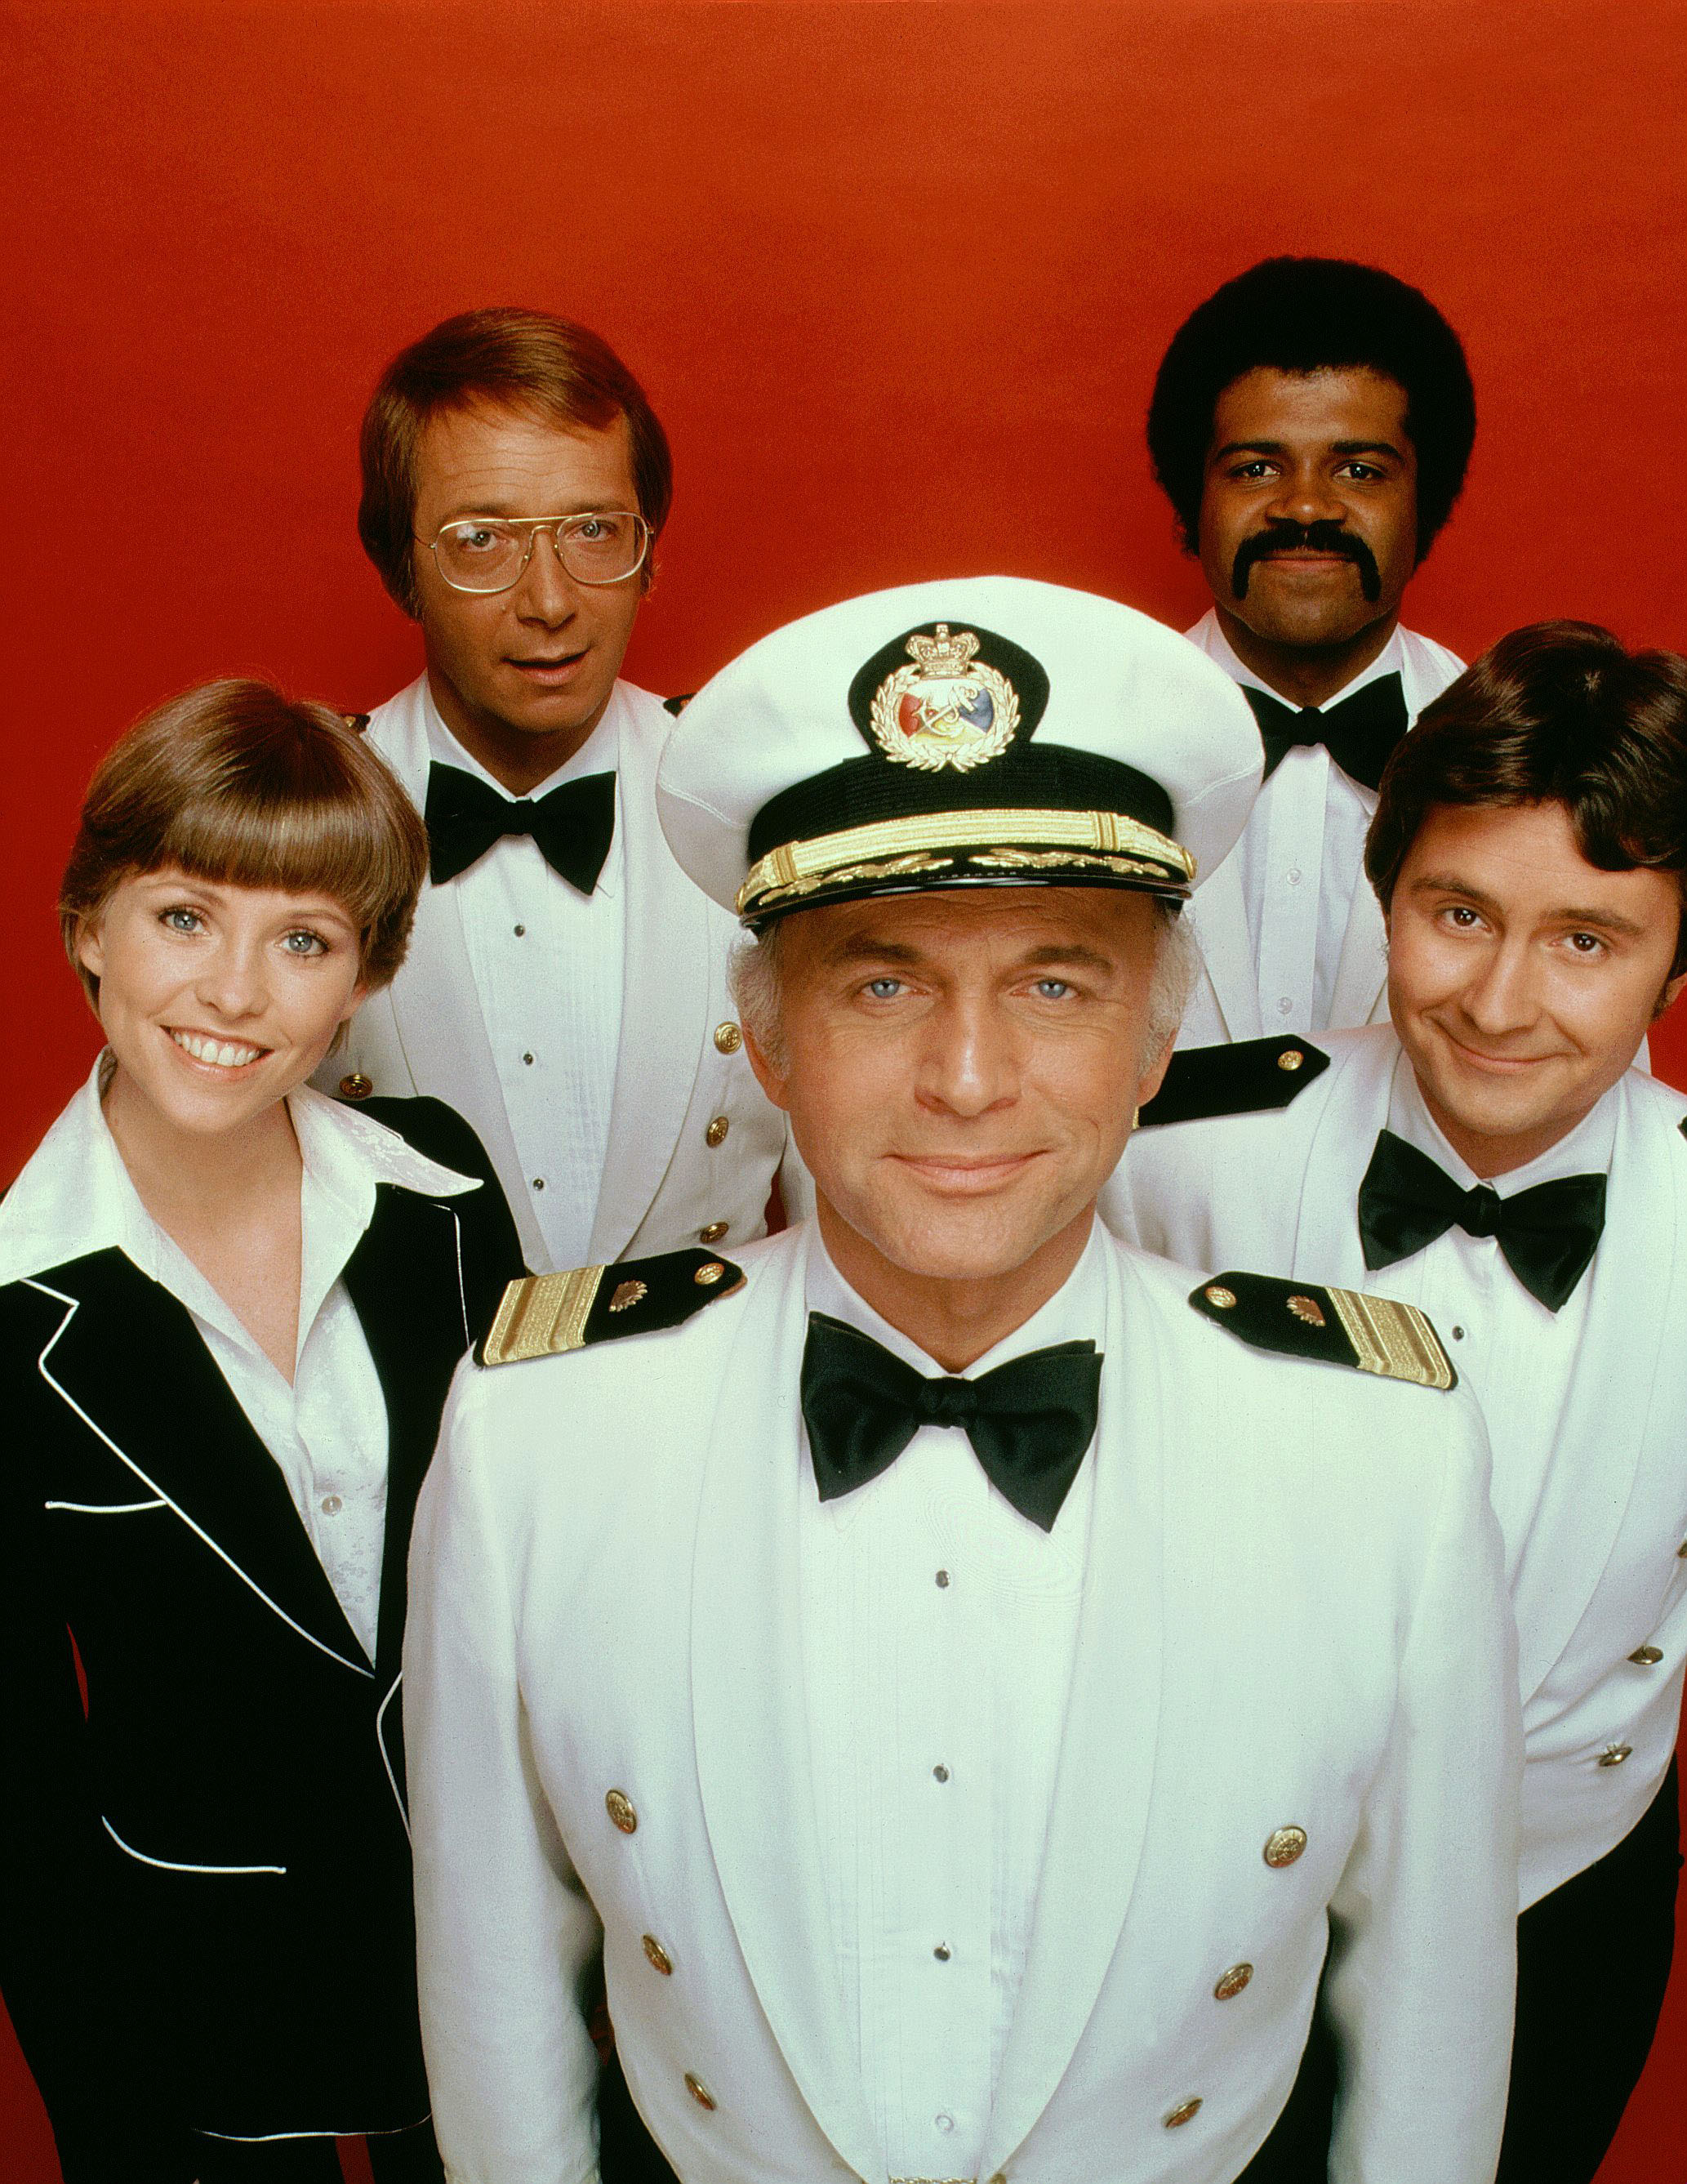 'The Love Boat' A BehindtheScenes Look at the Making of the Show